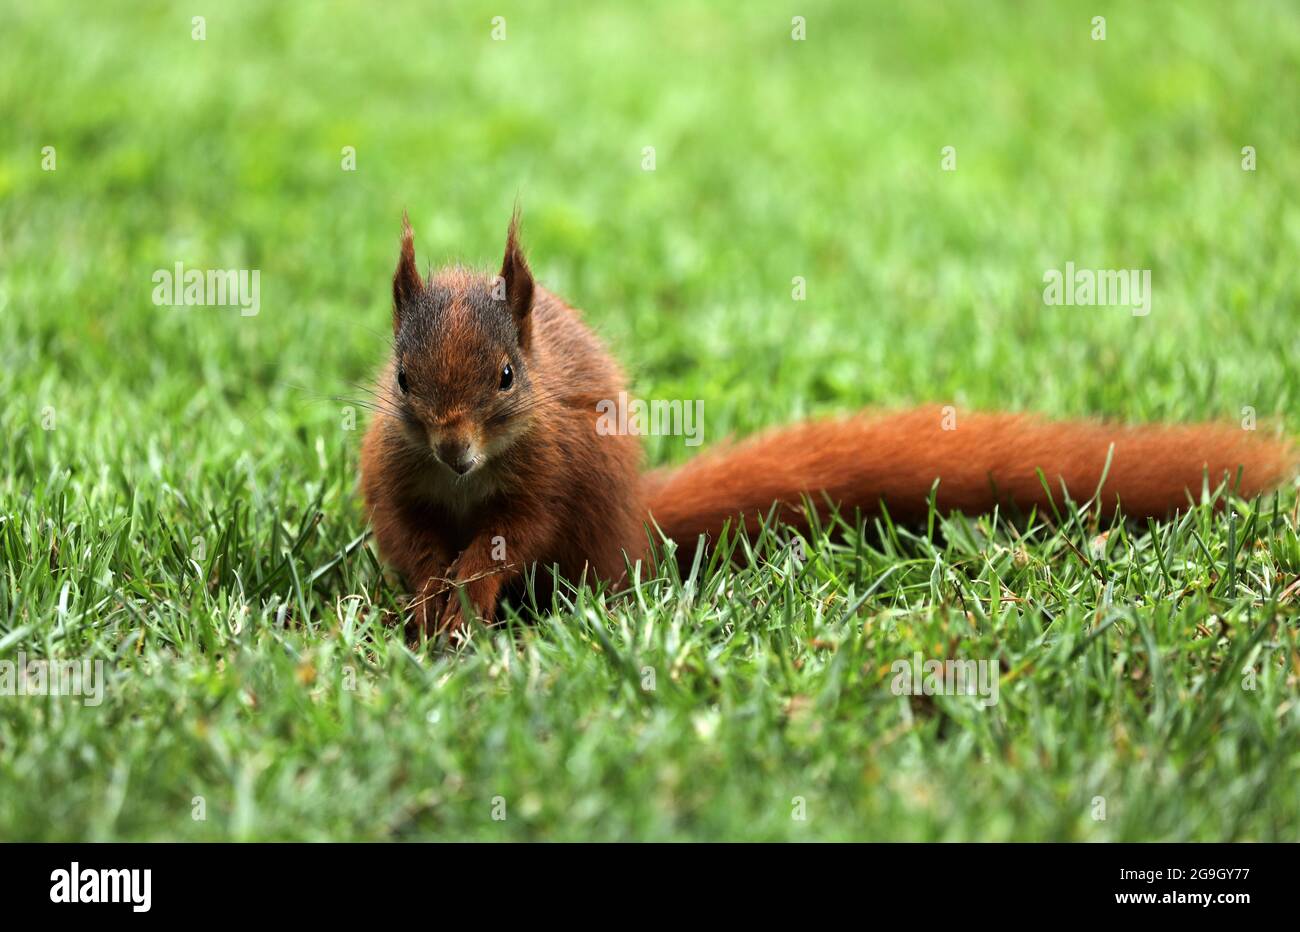 Squirrel sits on a meadow in the grass Stock Photo